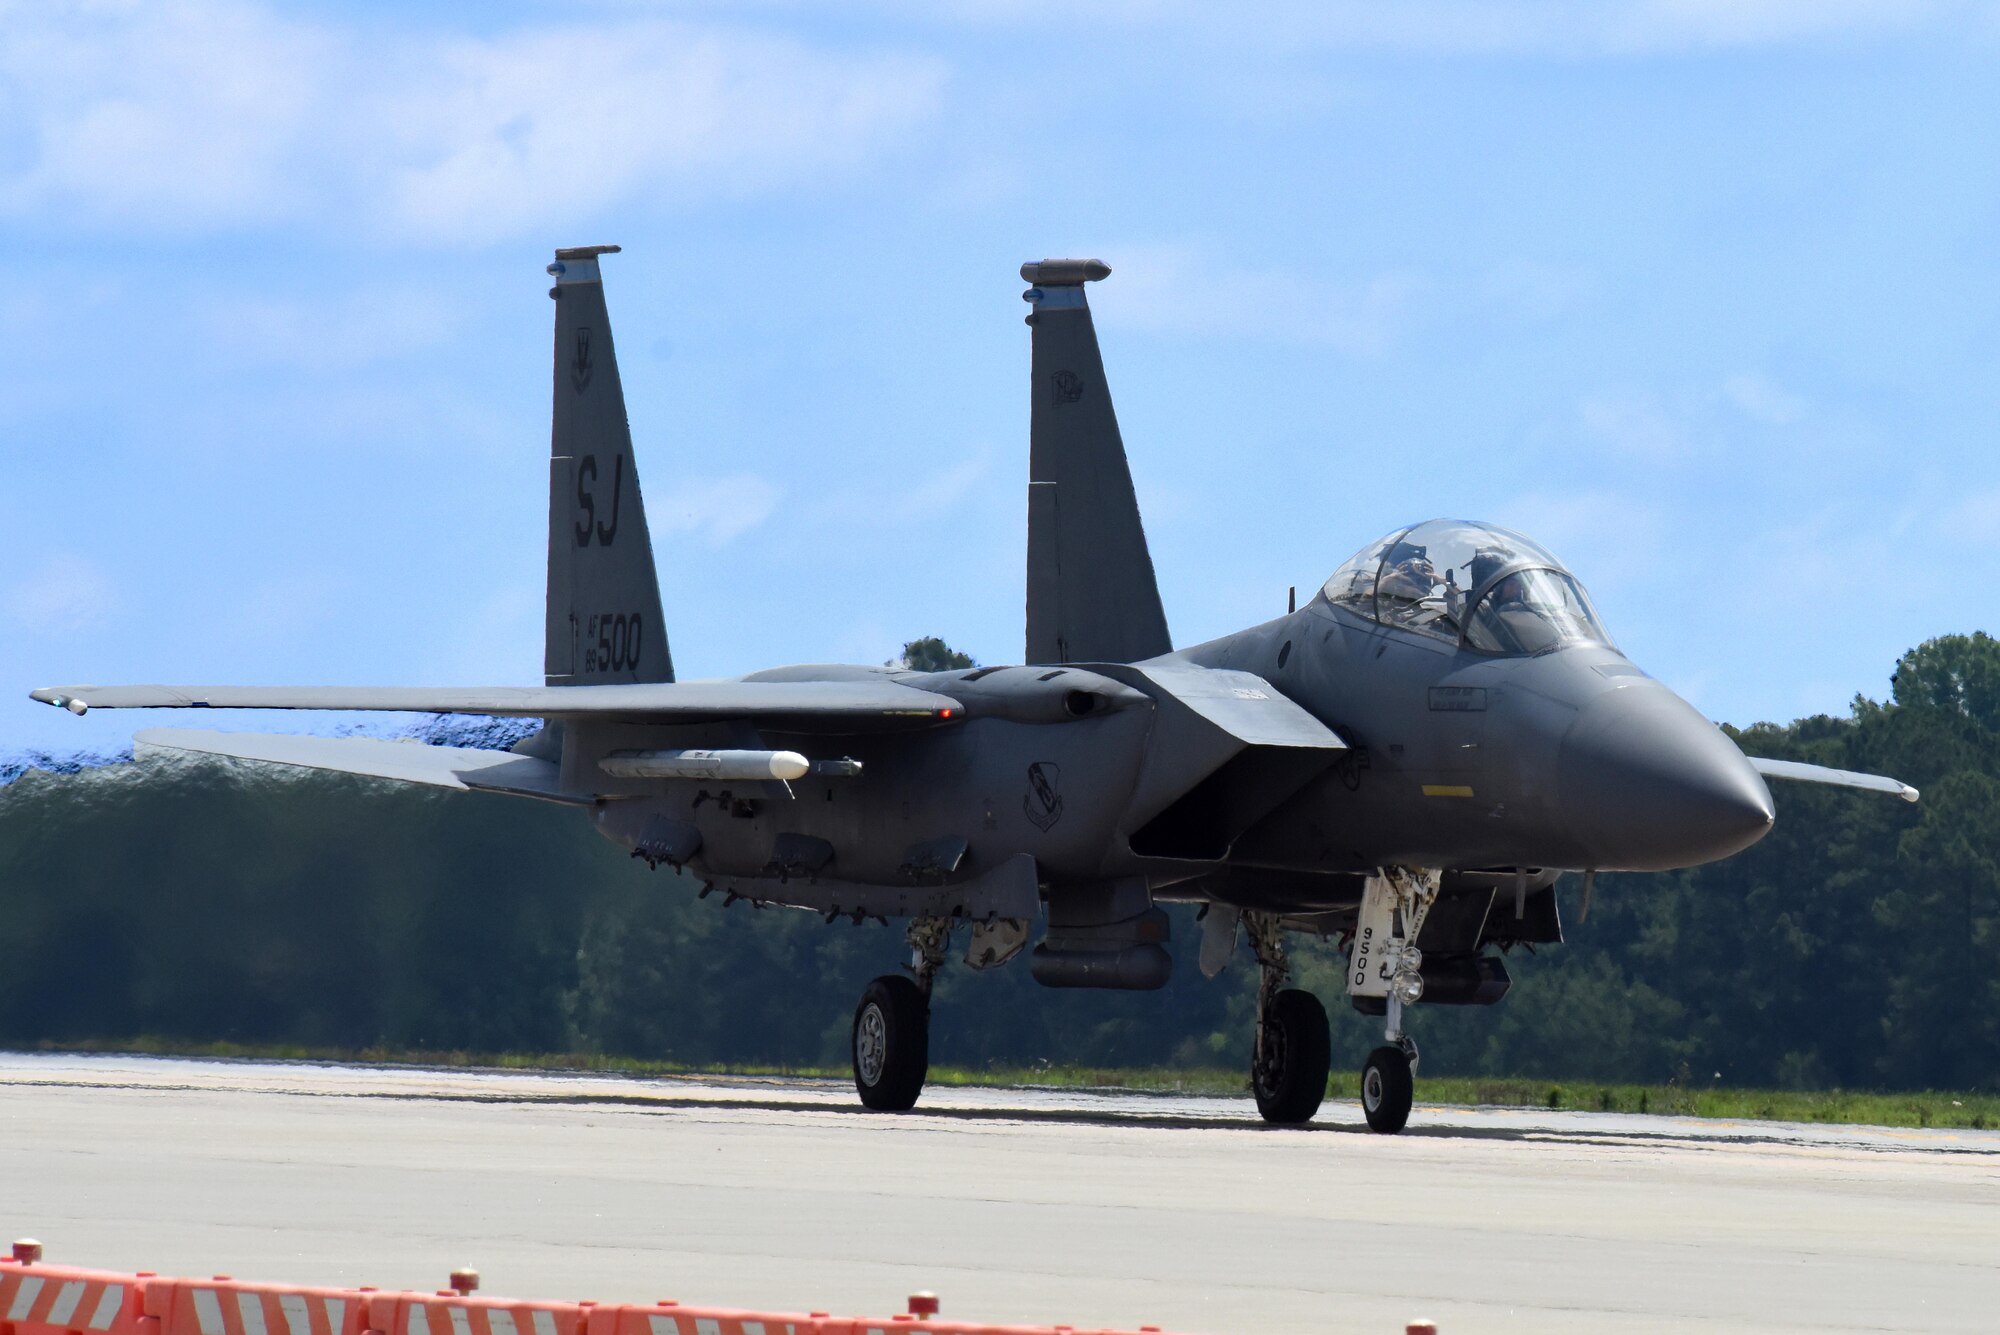 Lt. Col. Eric Schmidt, 334th Fighter Squadron director of operations and pilot, and Maj. Timothy Foery, 334th FS weapon systems officer taxi following an F-15E Strike Eagle flight June 17, 2016, at Seymour Johnson Air Force Base, North Carolina. Schmidt completed his final flight in the aircraft before moving to Vance AFB, Oklahoma to be a T-38 Talon instructor pilot. (U.S. Air Force photo/Tech. Sgt. Chuck Broadway)